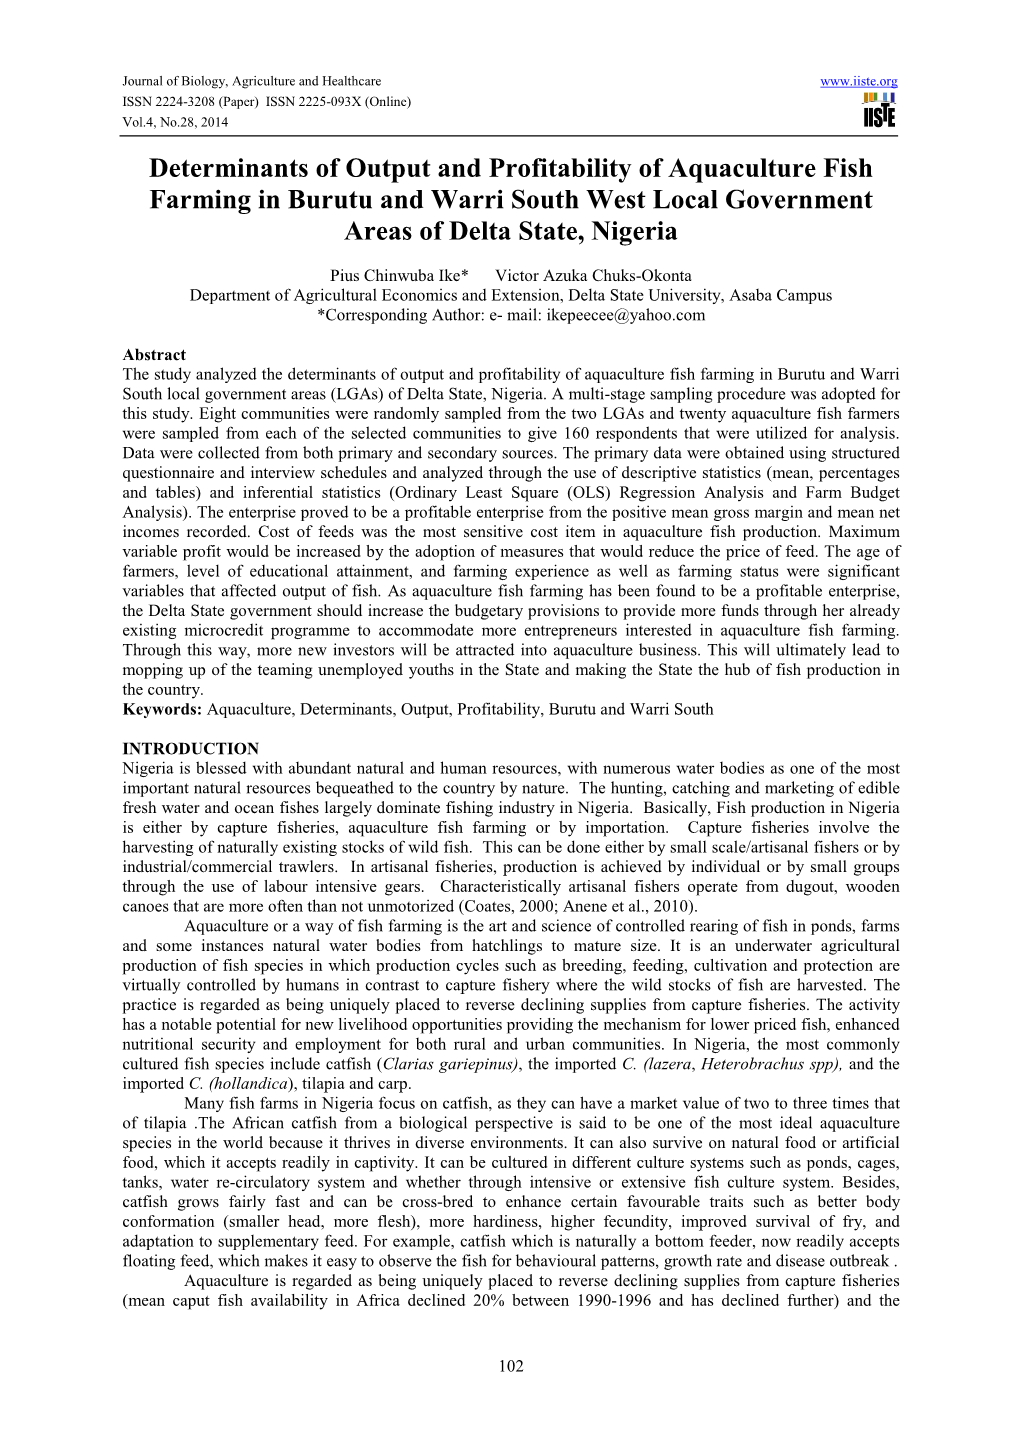 Determinants of Output and Profitability of Aquaculture Fish Farming in Burutu and Warri South West Local Government Areas of Delta State, Nigeria